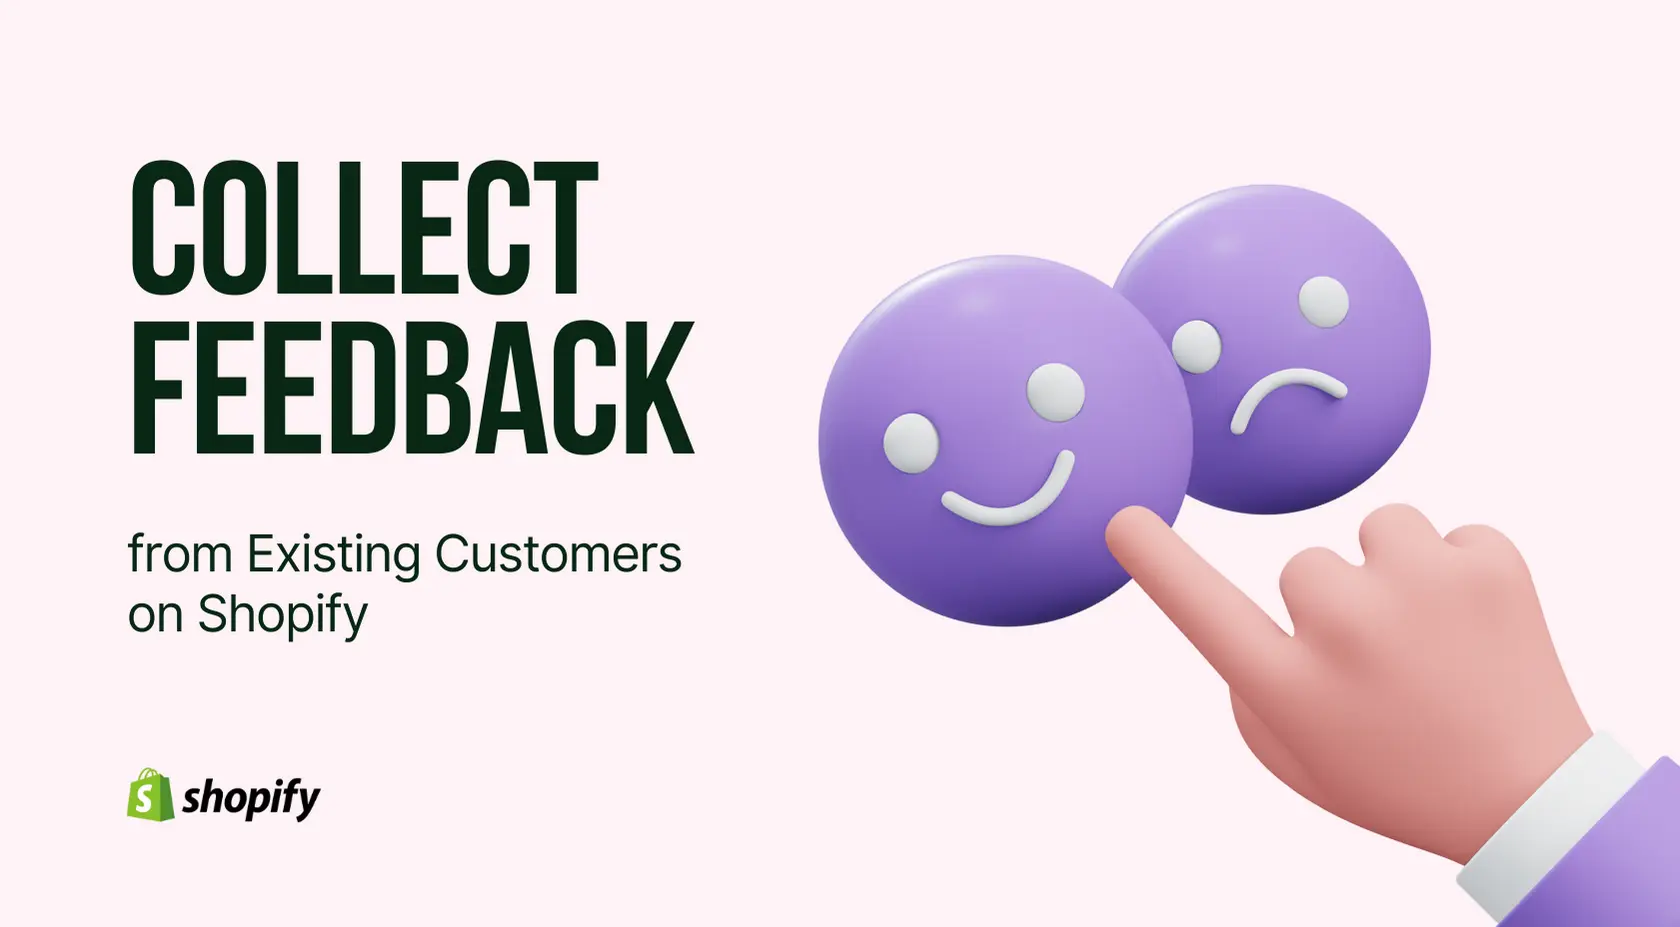 Reward Existing Customers for Their Feedback with a Simple Free Shipping Offer Popup